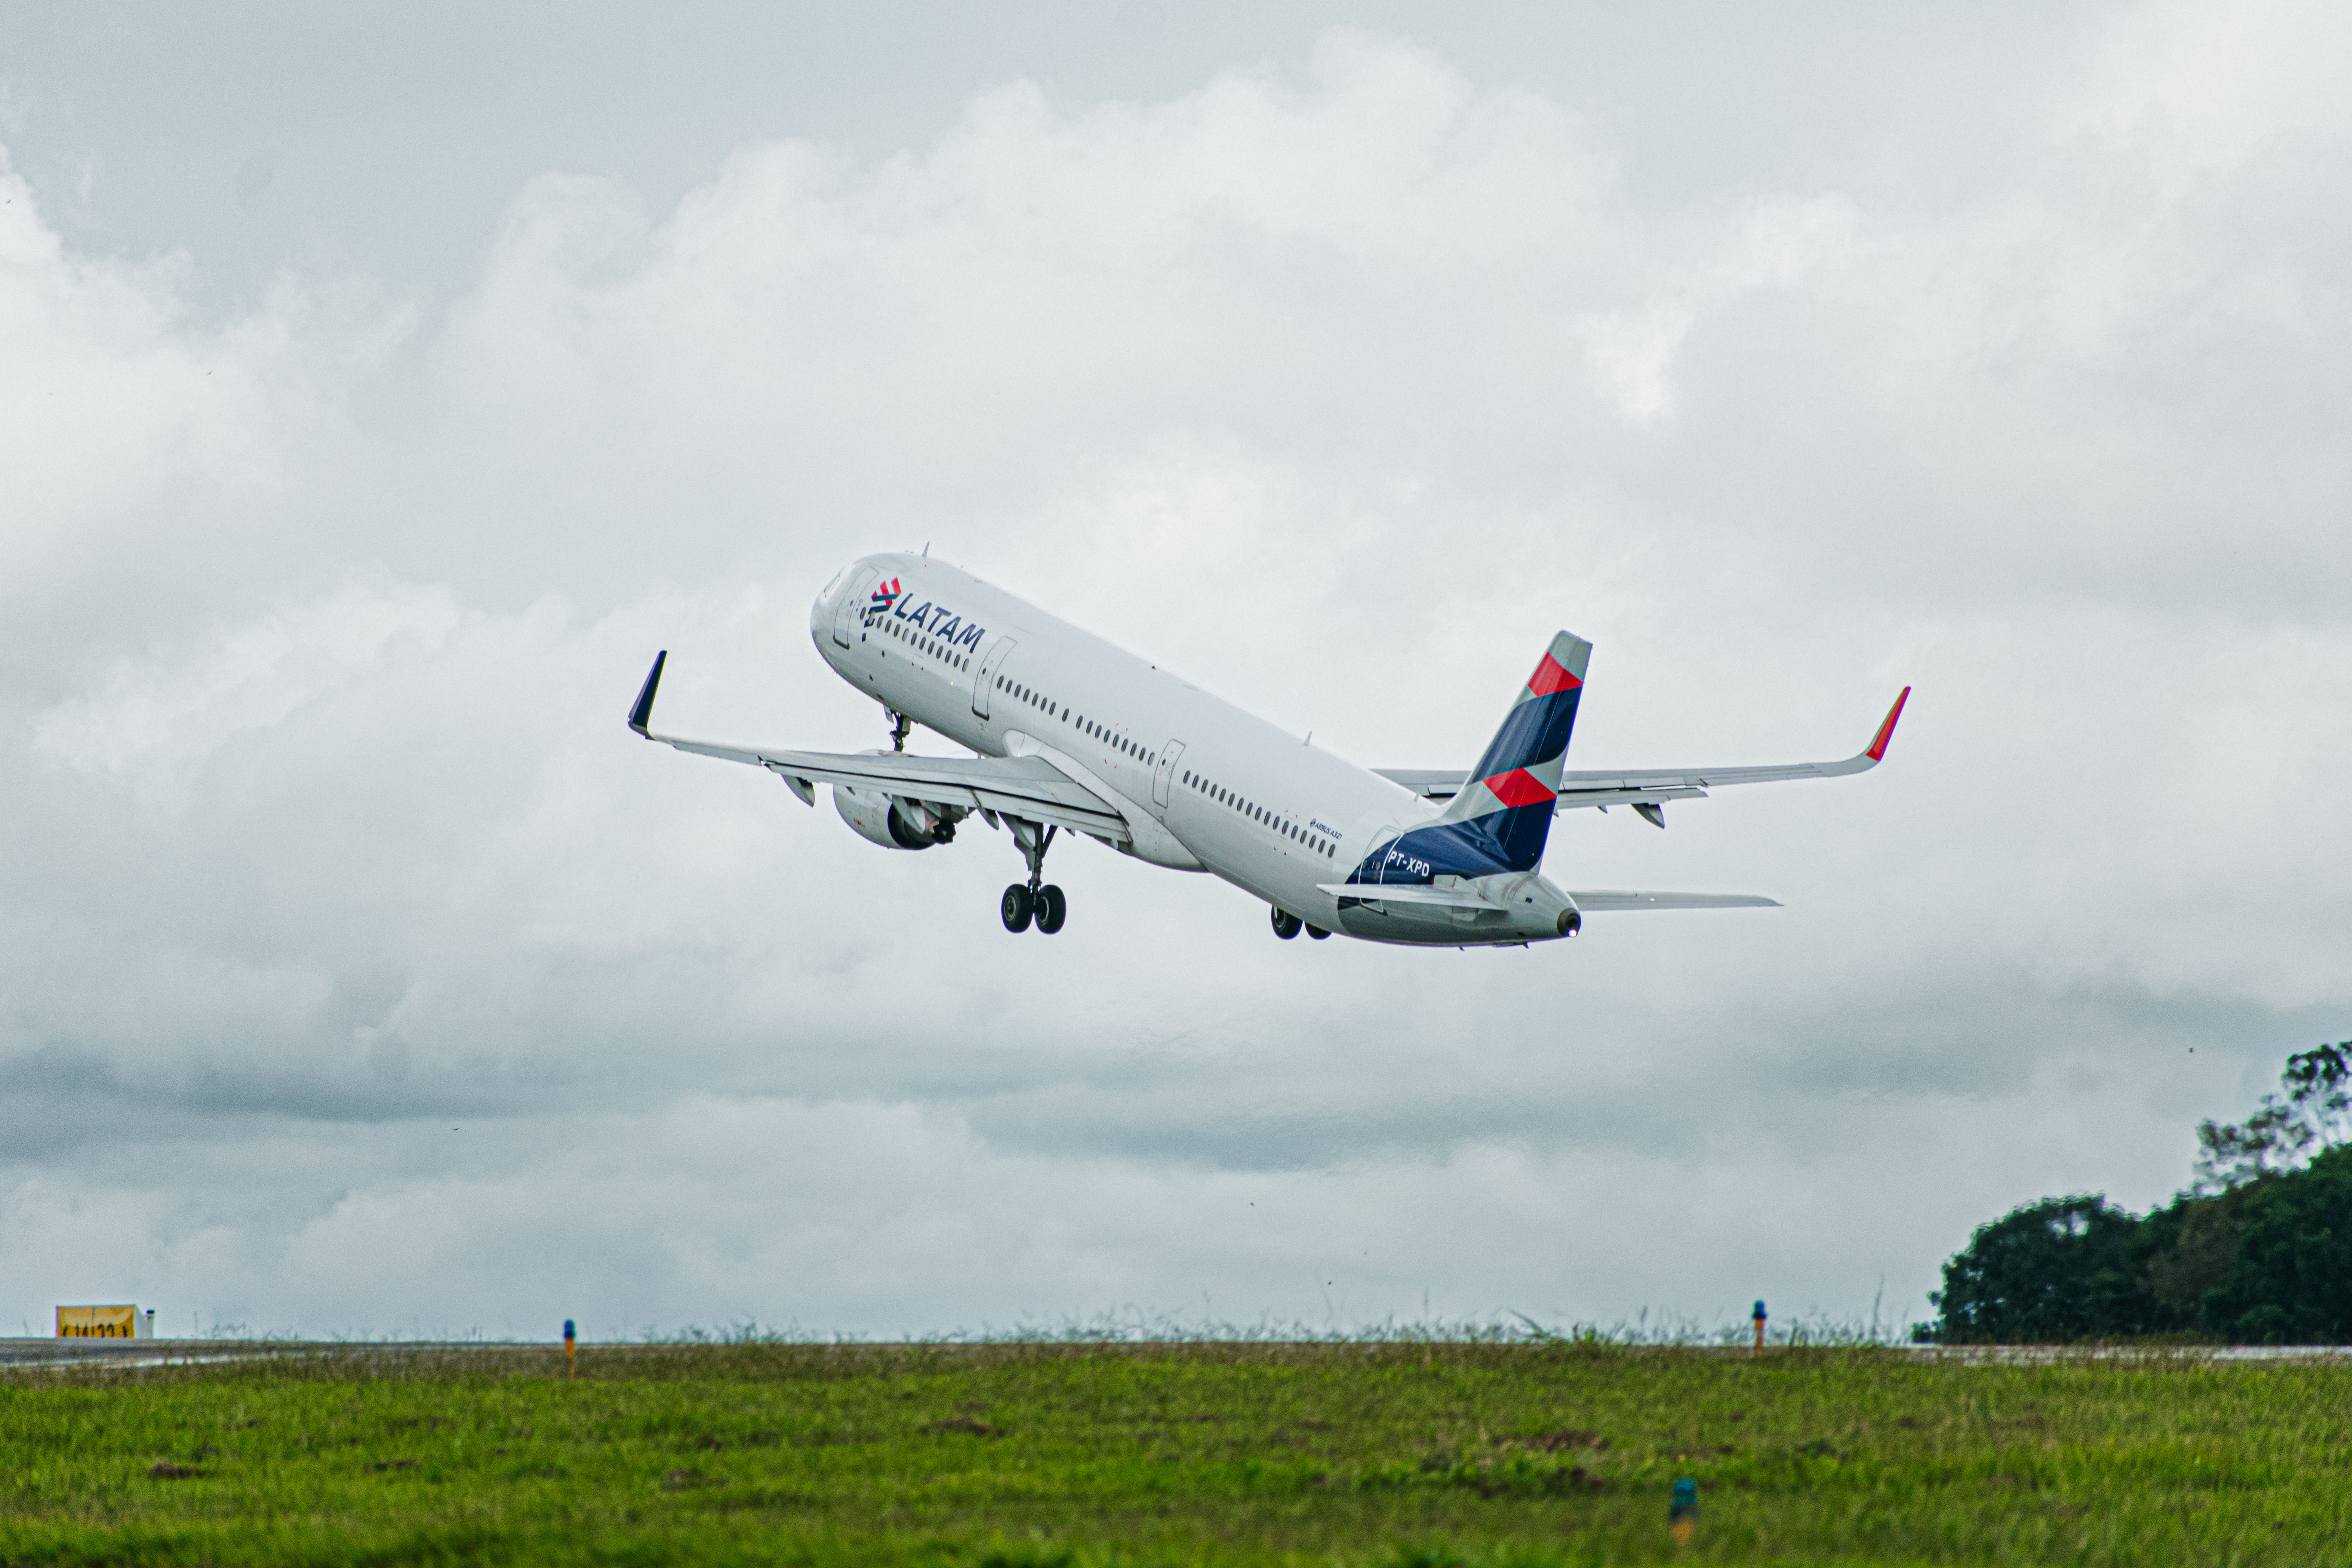 LATAM Brasil Airbus A321 taking off from GYN